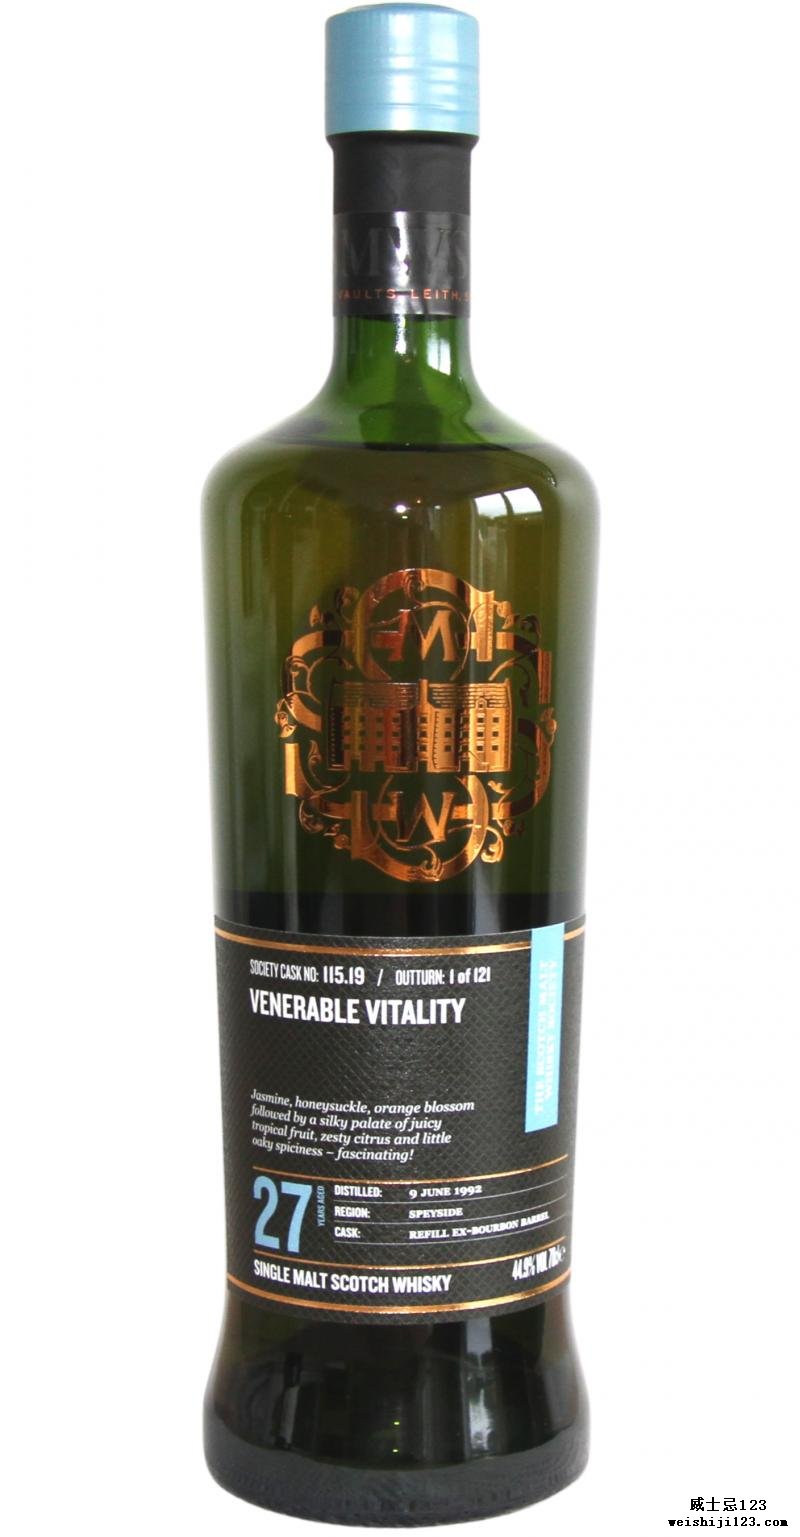 An Cnoc 1992 SMWS 115.19